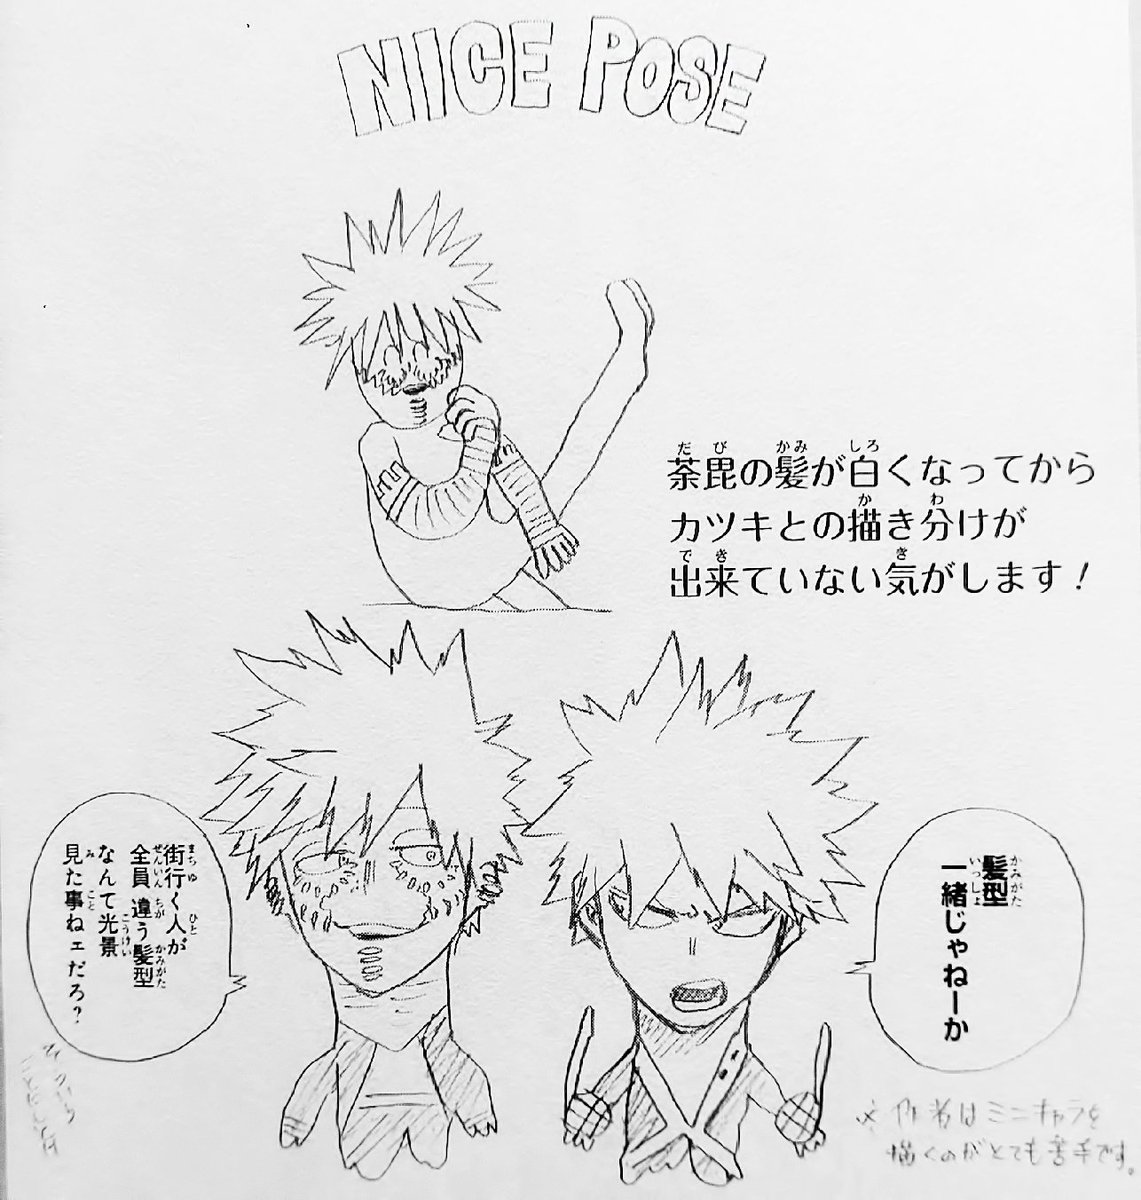 Horikoshi hasn't been able to draw Dabi differently from Katsuki, since his hair turned white. (they have the same haircut, and he can't draw chibis.) 